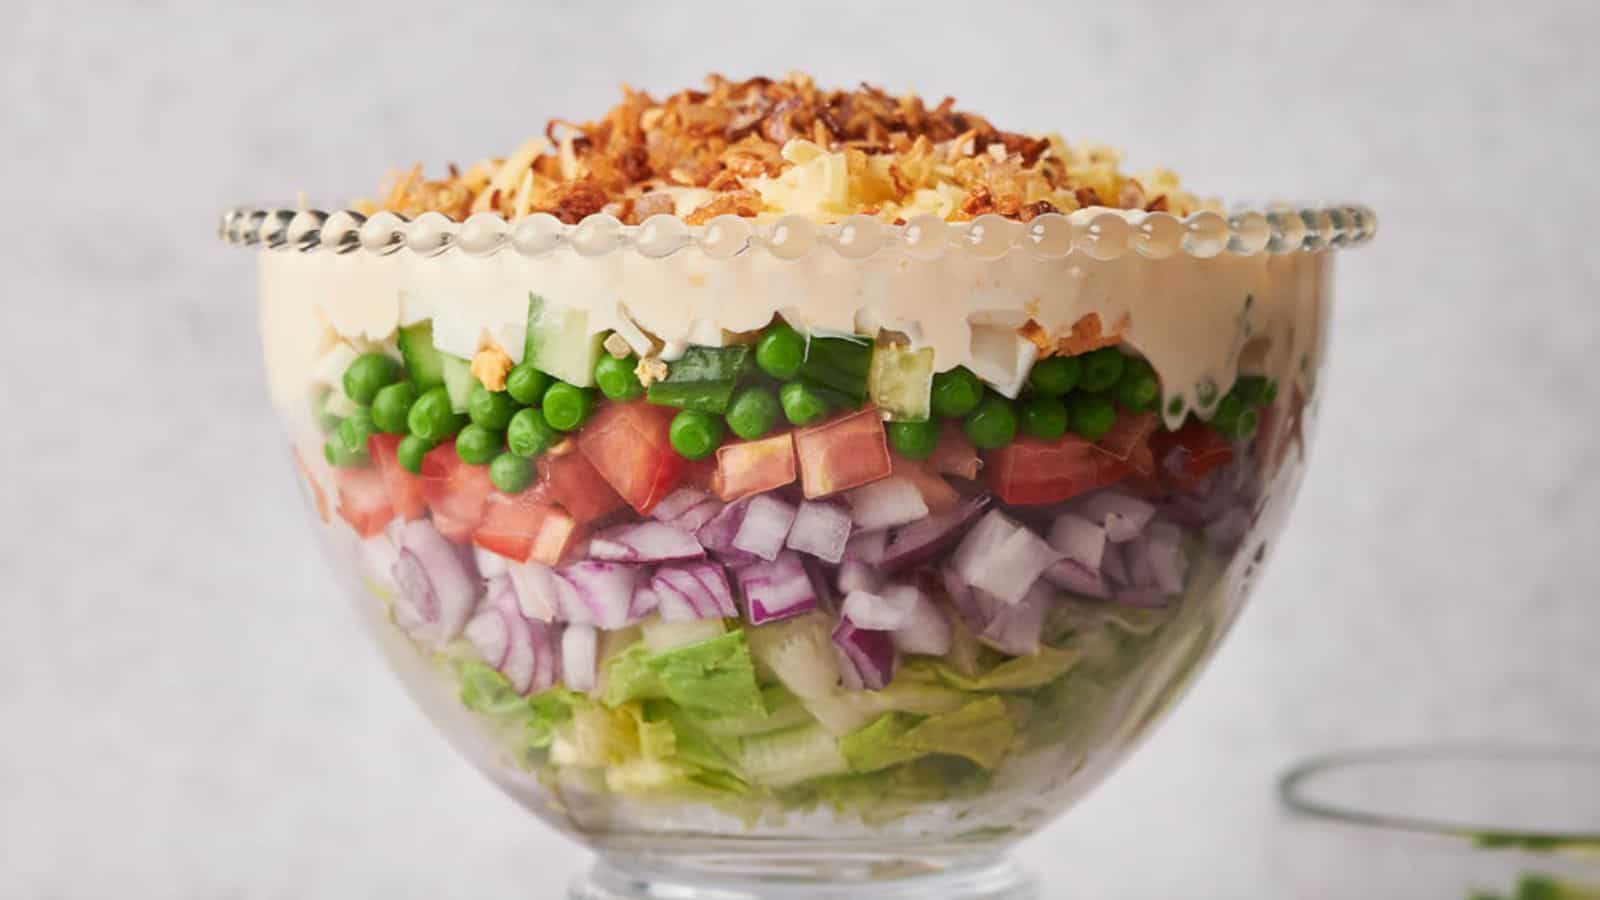 <p>Brighten up your Sunday meal with this multilayered, refreshing 7 Layer Salad. Packed with multiple veggies, cheese, and dressing for that extra zing, it’s perfect for your Sunday noon. A perfect refreshing and stress-free way to cap off your weekend.<br><strong>Get the Recipe: </strong><a href="https://www.splashoftaste.com/seven-layer-salad/?utm_source=msn&utm_medium=page&utm_campaign=msn">7 Layer Salad</a></p> <p>The post <a rel="nofollow" href="https://www.splashoftaste.com/27-stress-free-sunday-recipes-to-cap-off-your-weekend-in-tasty-style/">27 Stress-free Sunday Recipes To Cap Off Your Weekend In Tasty Style</a> appeared first on <a rel="nofollow" href="https://www.splashoftaste.com">Splash of Taste - Vegetarian Recipes</a>.</p>